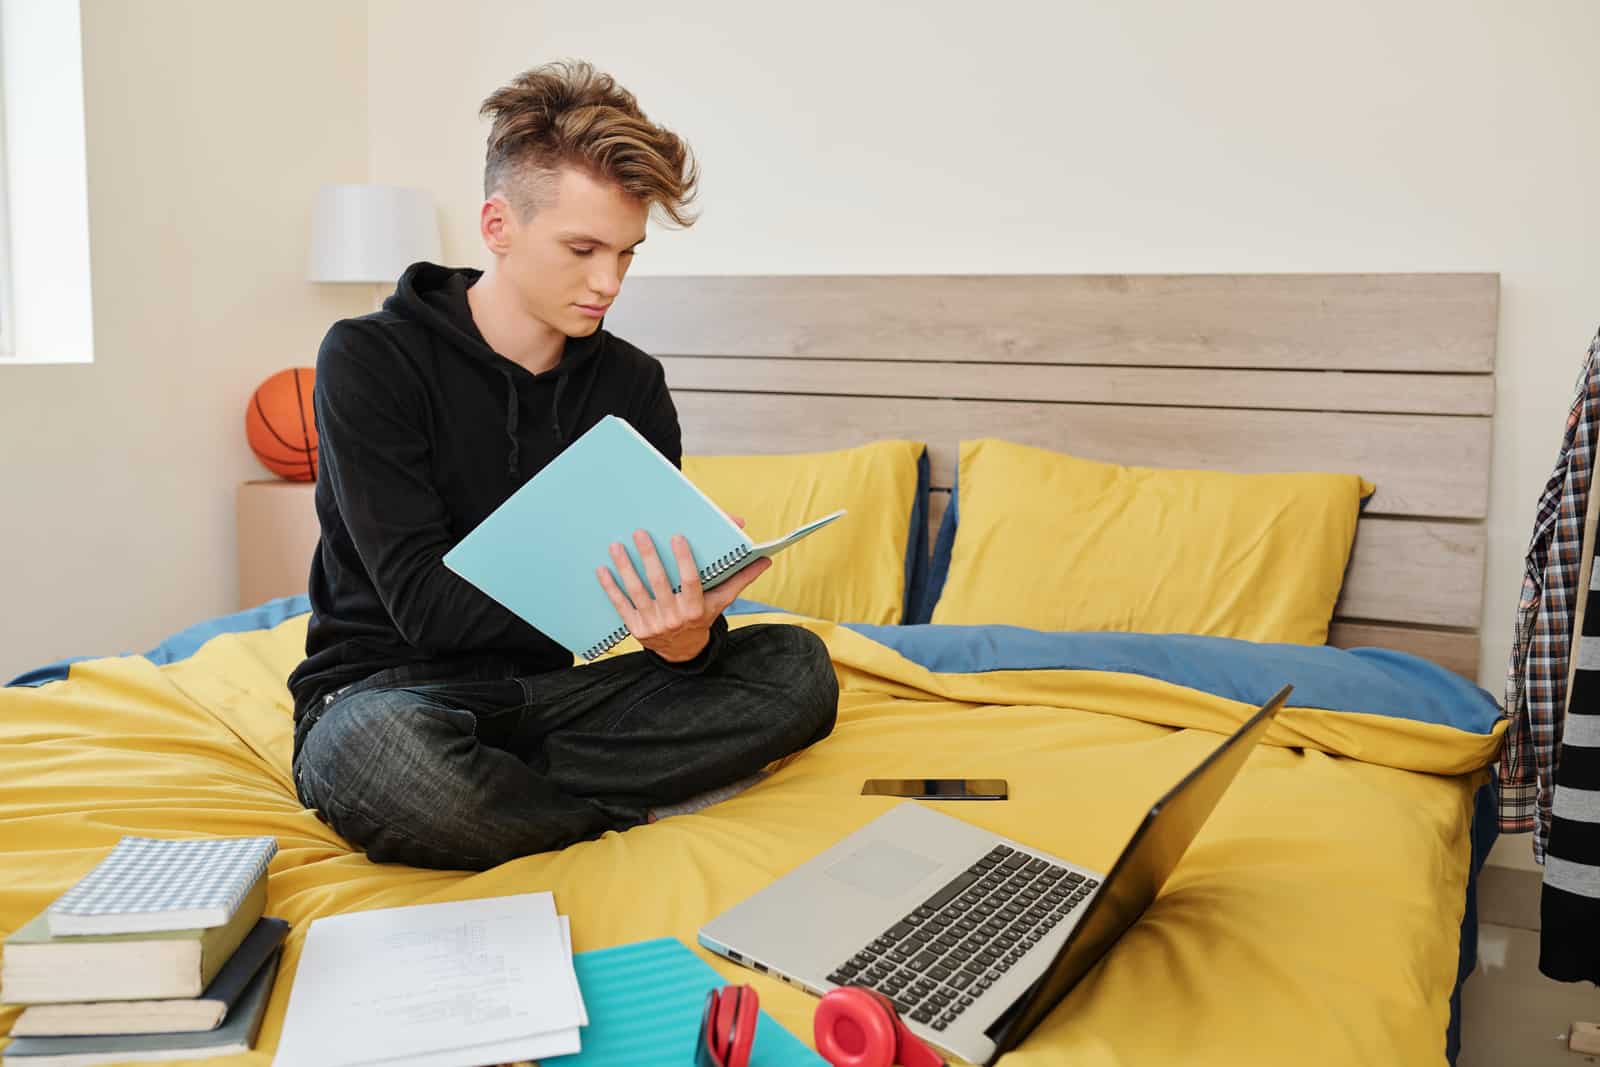 50 Best Dorm Gifts To Give College Students - Edilondon